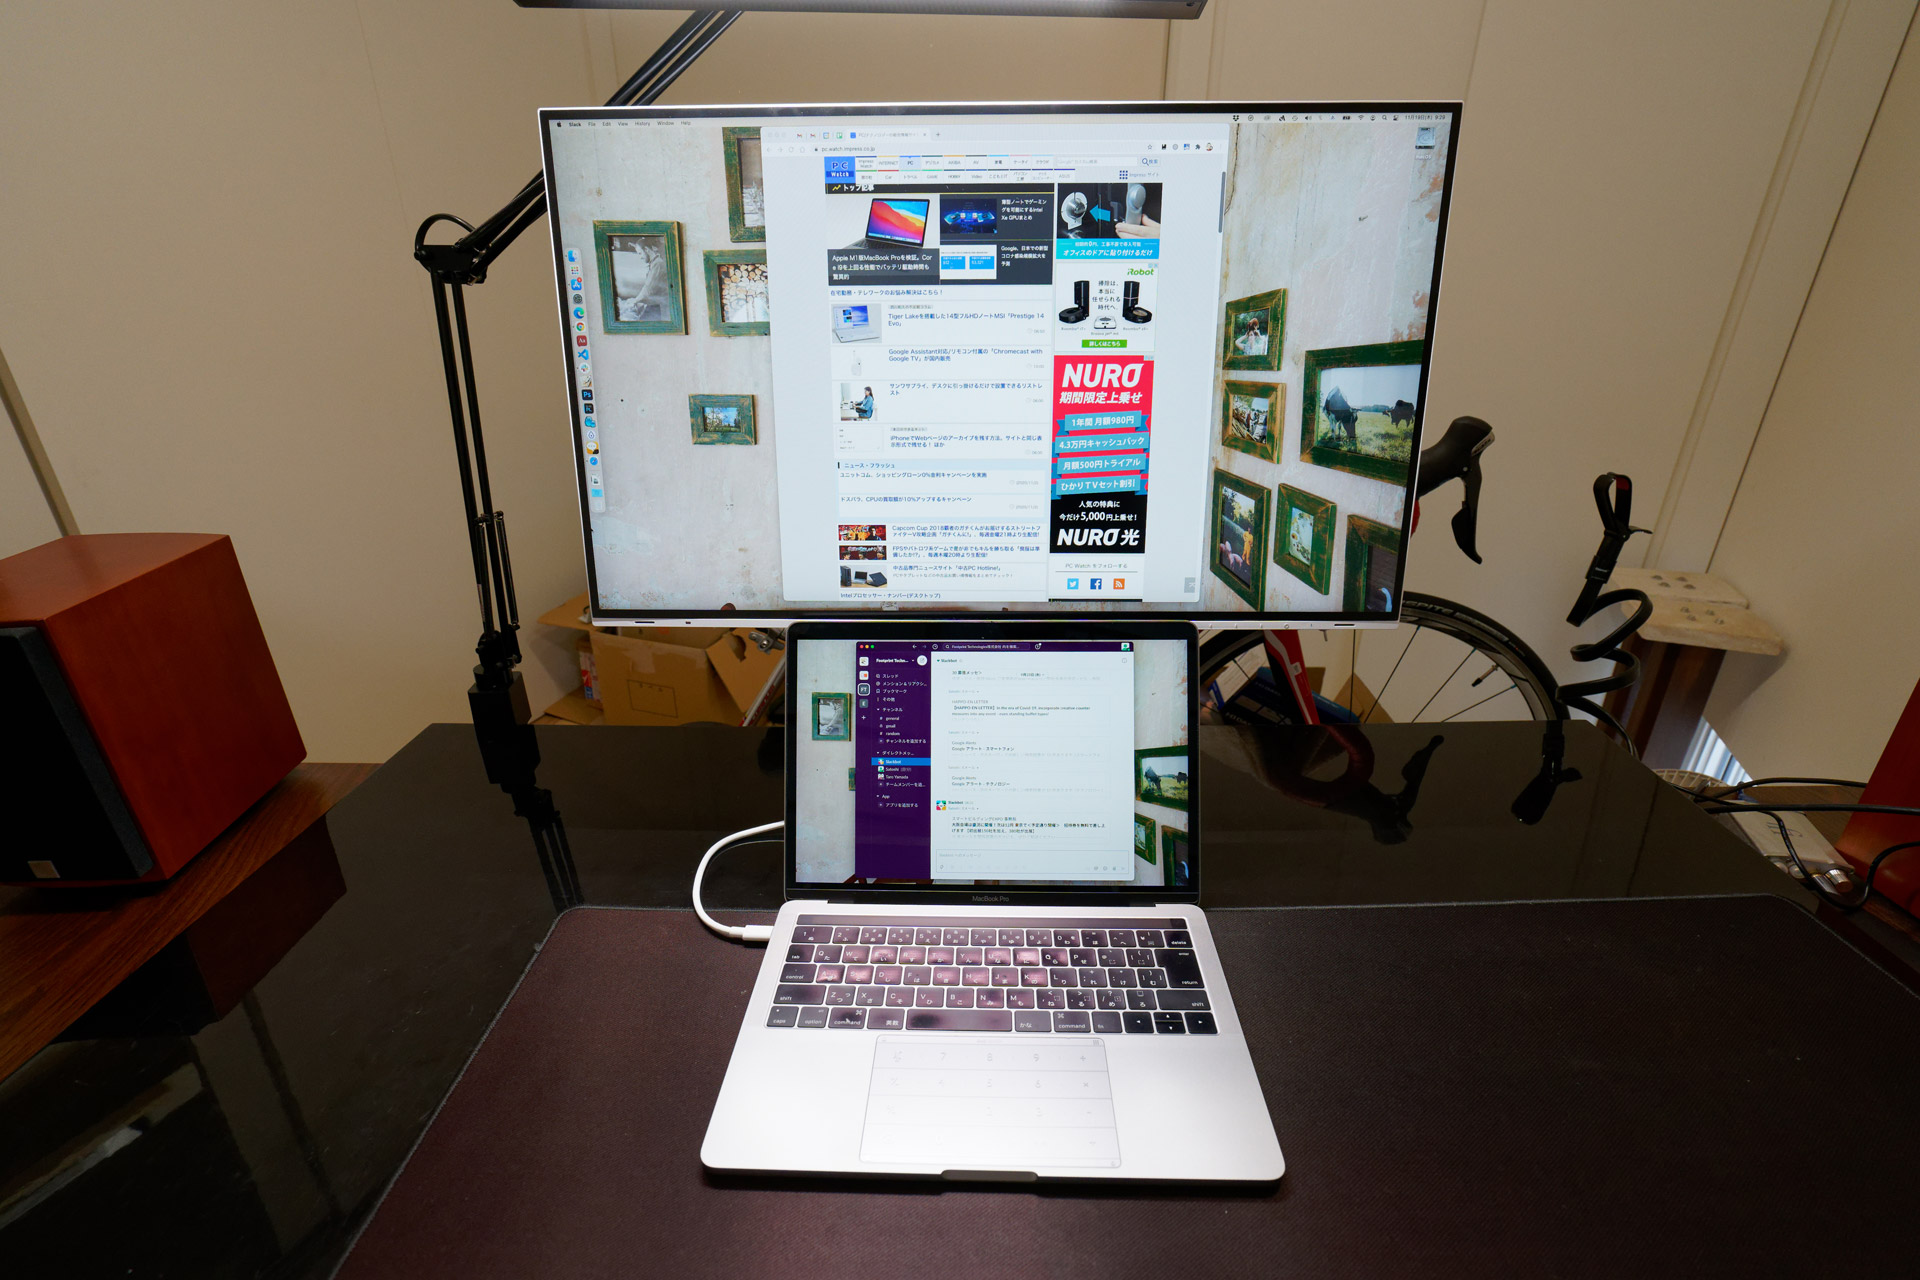 The stand's freely adjustable height makes it possible to place the 13-inch MacBook Pro underneath.